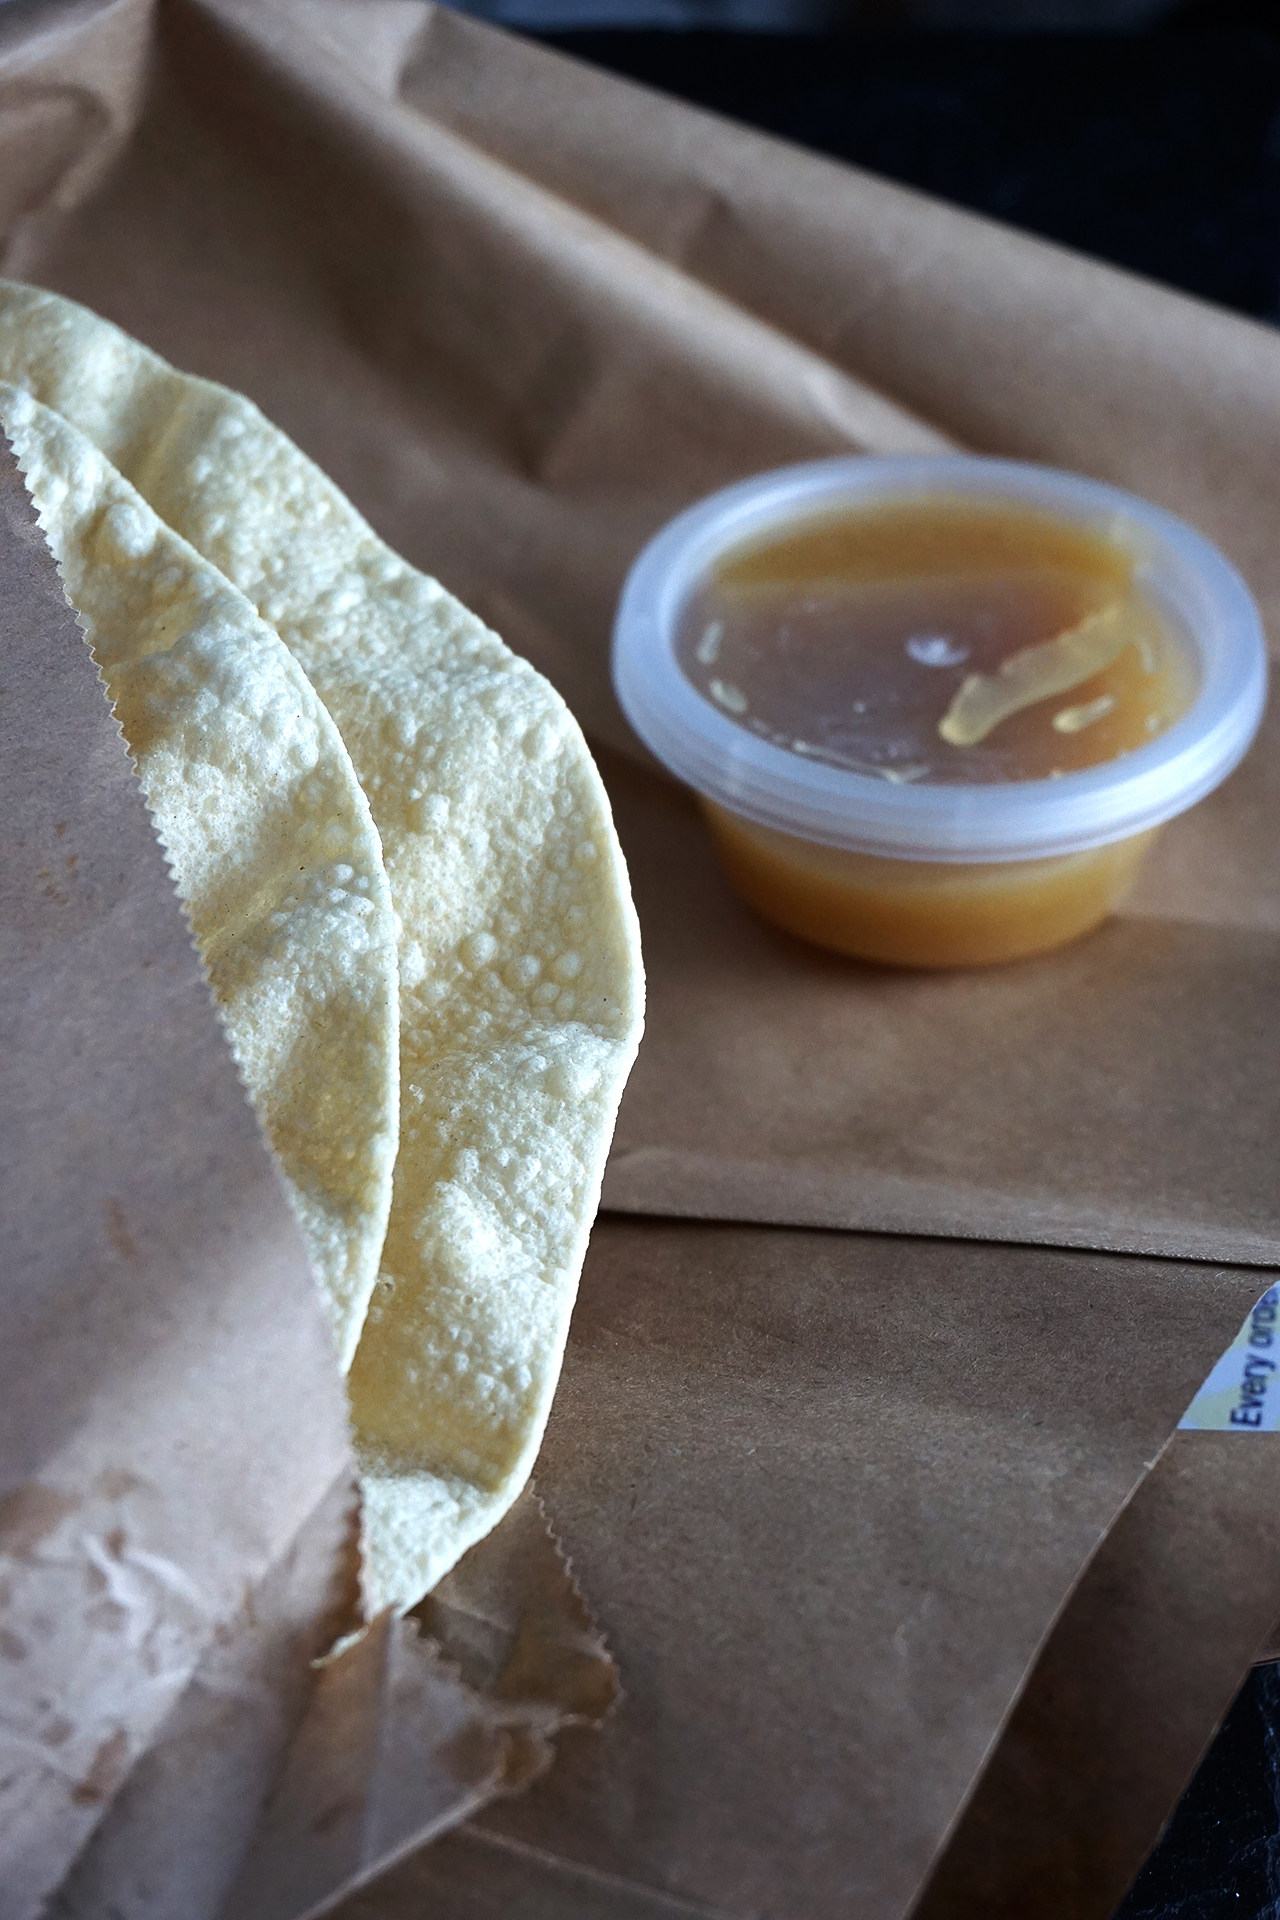 popadums and mango chutney from Everest Spice (Holloway gluten free Indian takeaway)